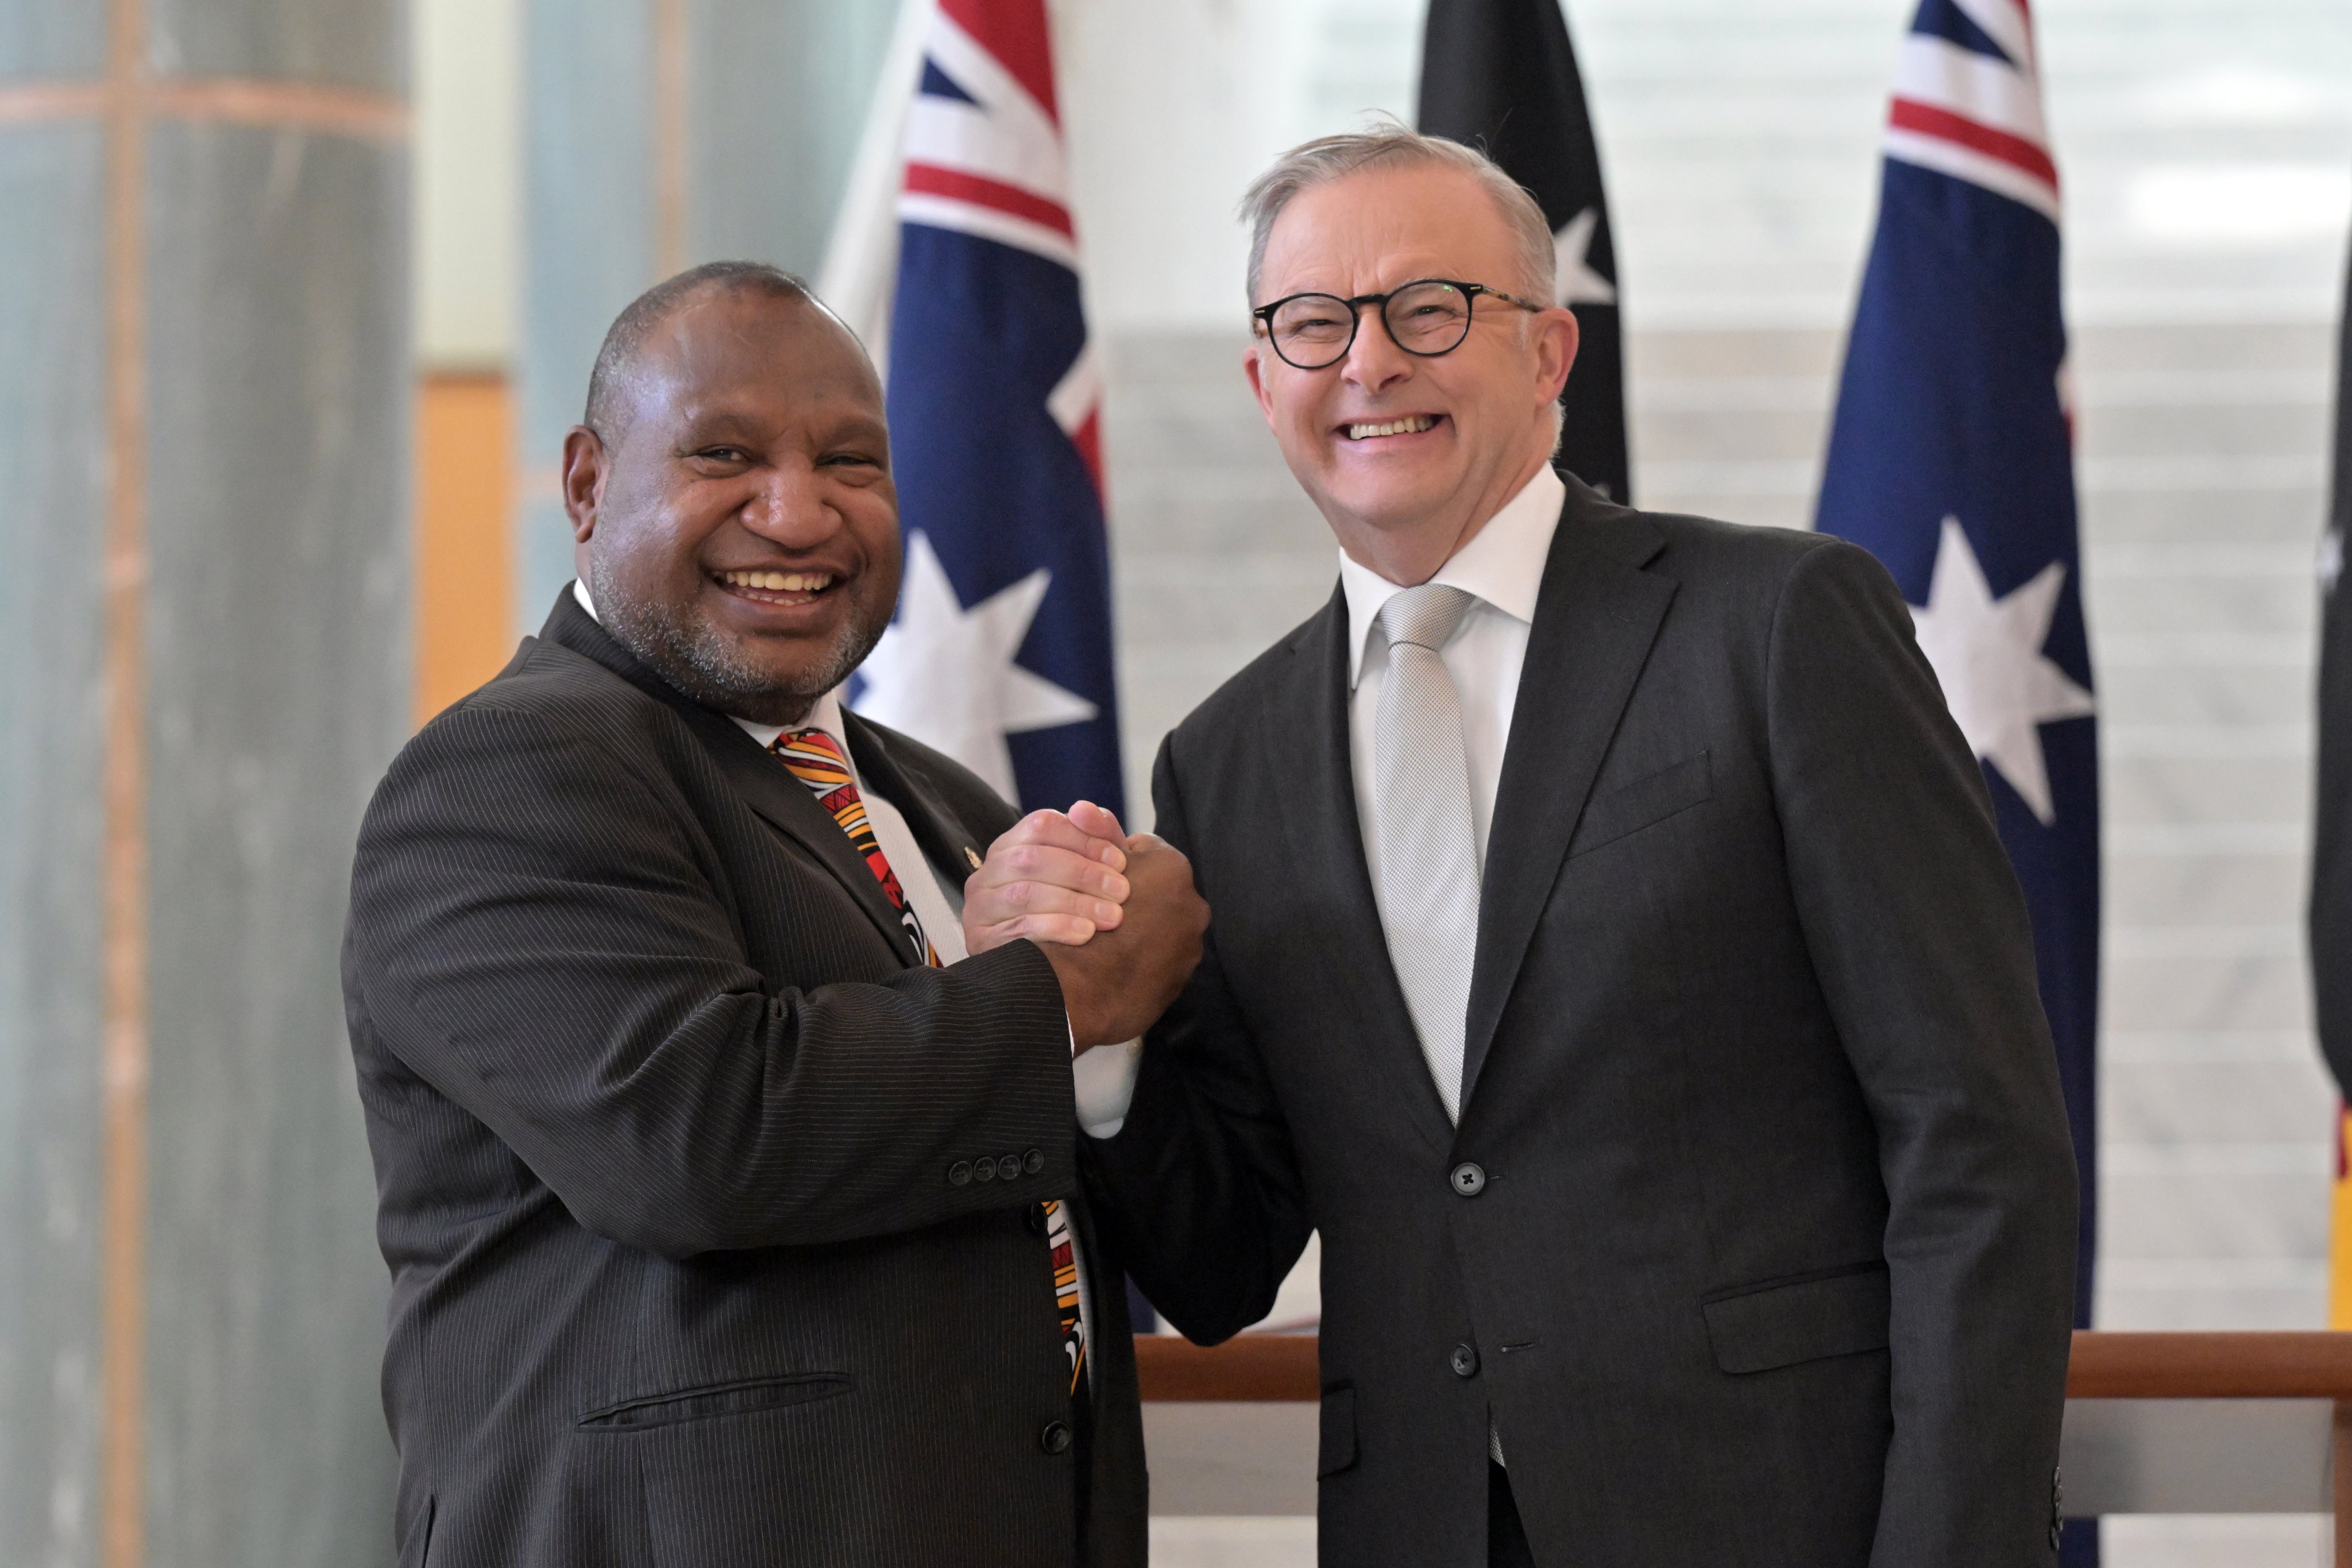 Australia’s Prime Minister Anthony Albanese (right) and Papua New Guinea’s Prime Minister James Marape shake hands after Marape signs the visitors’ book at Parliament House in Canberra. Photo: EPA-EFE